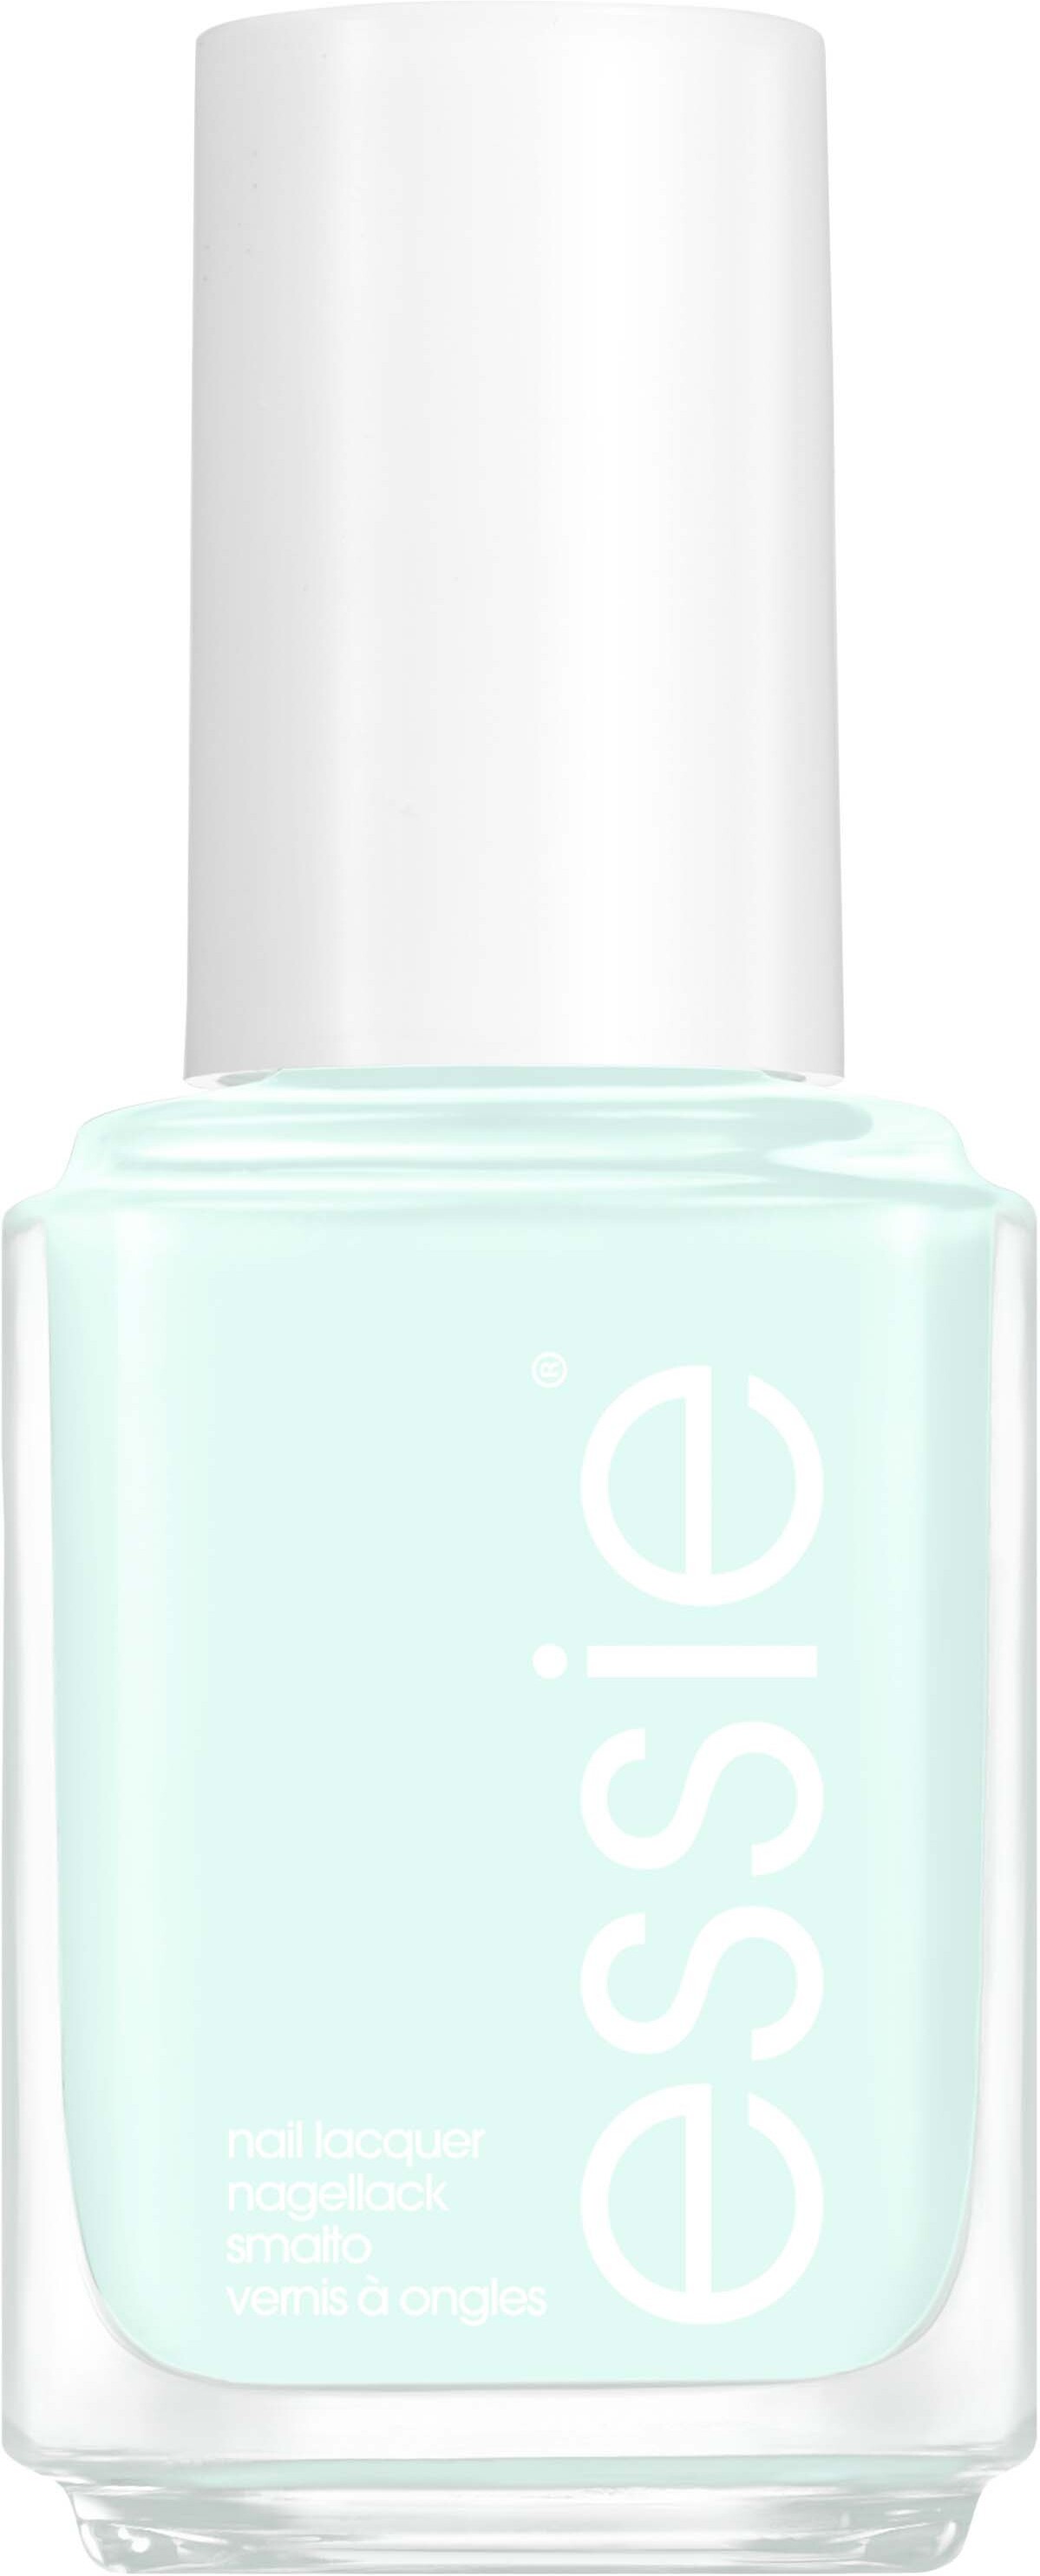 Essie Spring Collection Nail Lacquer 963 First Kiss Bliss